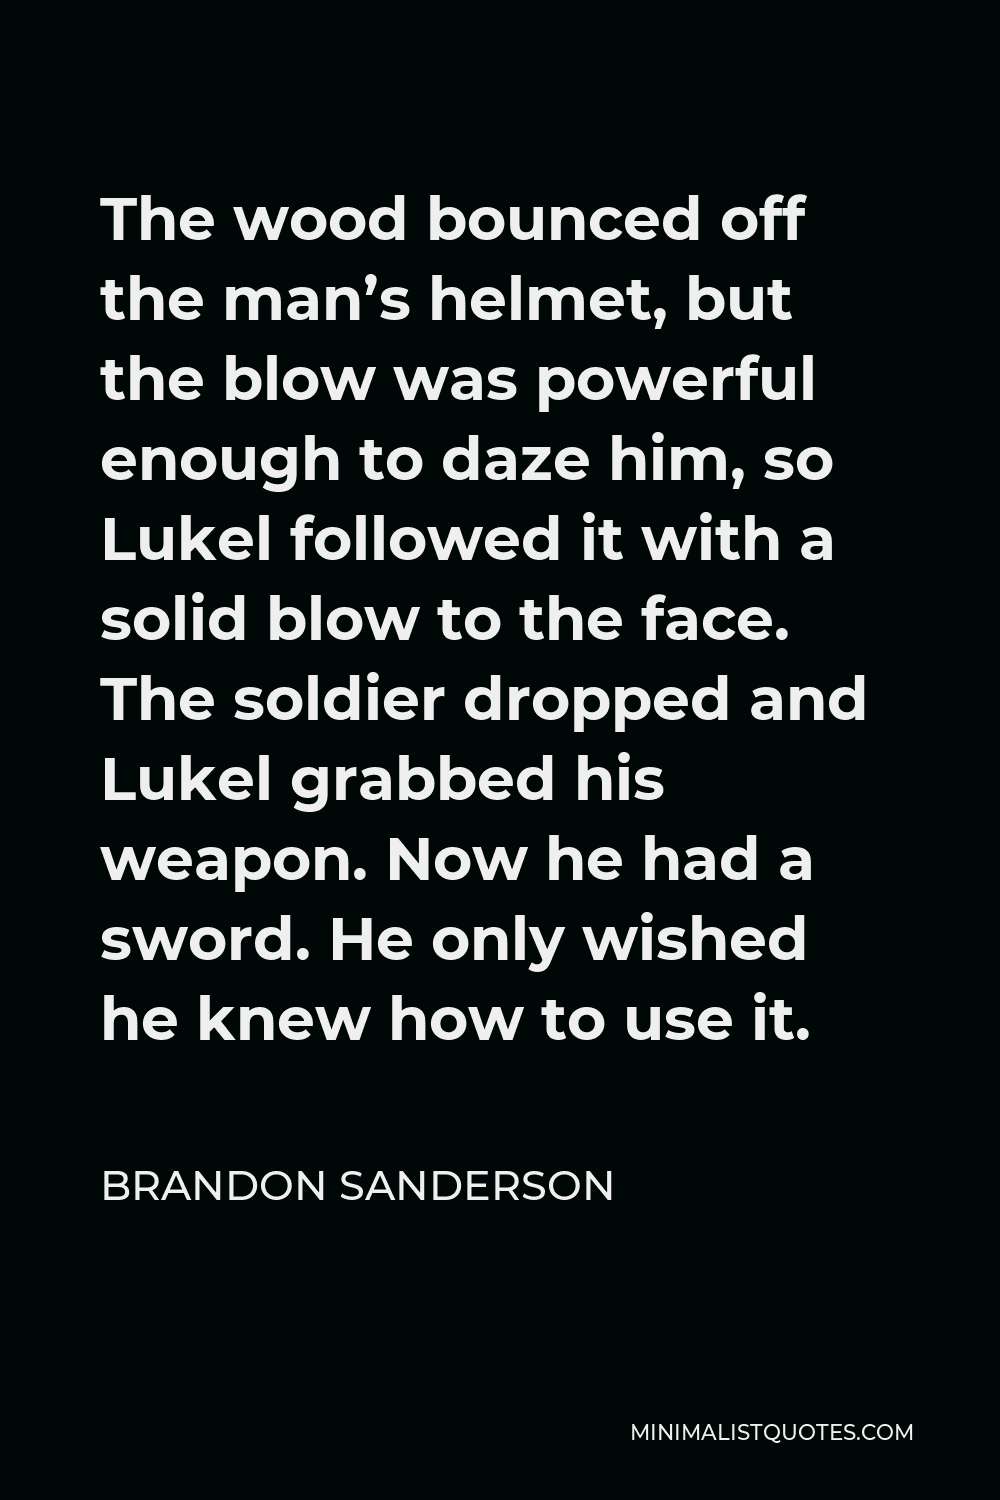 Brandon Sanderson Quote - The wood bounced off the man’s helmet, but the blow was powerful enough to daze him, so Lukel followed it with a solid blow to the face. The soldier dropped and Lukel grabbed his weapon. Now he had a sword. He only wished he knew how to use it.